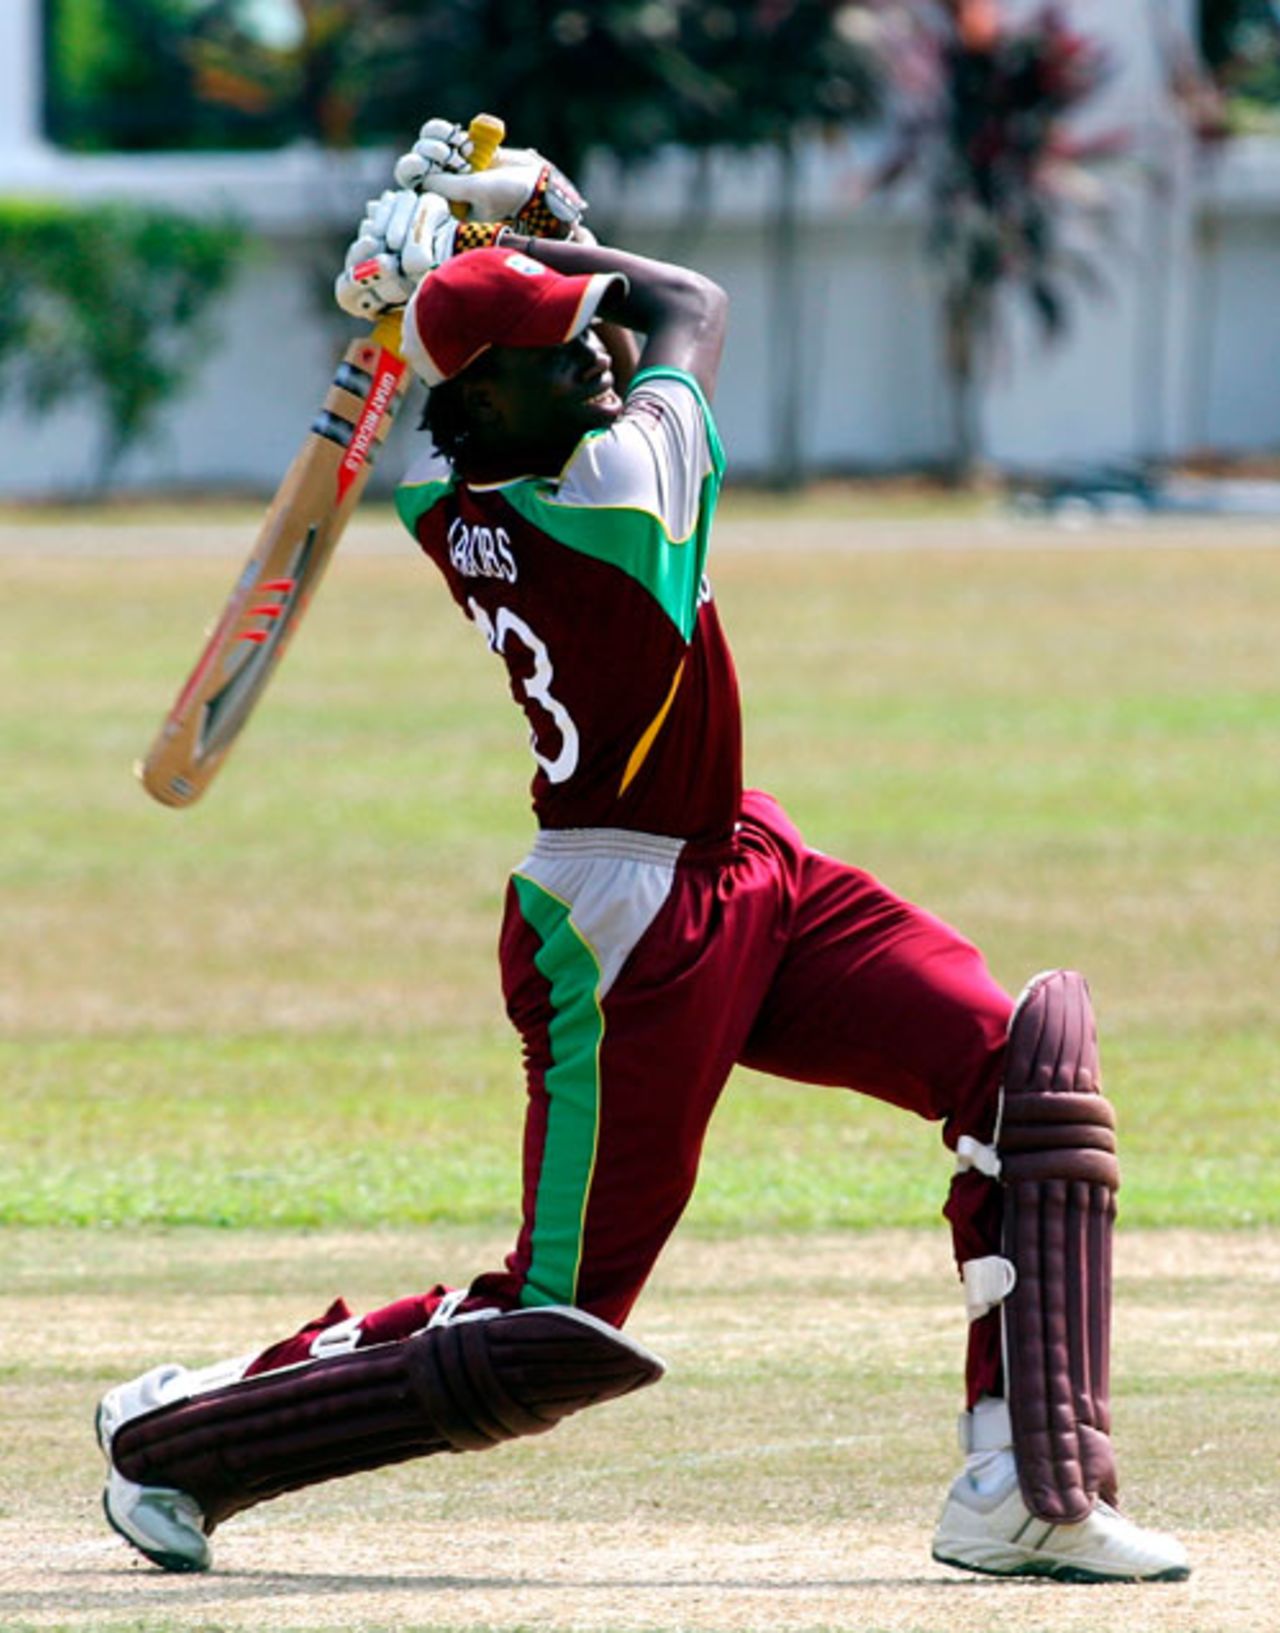 Steven Jacobs clatters one over the top, Papua New Guinea Under-19s v West Indies Under-19s, Under-19 World Cup, Kuala Lumpur, February 20, 2008